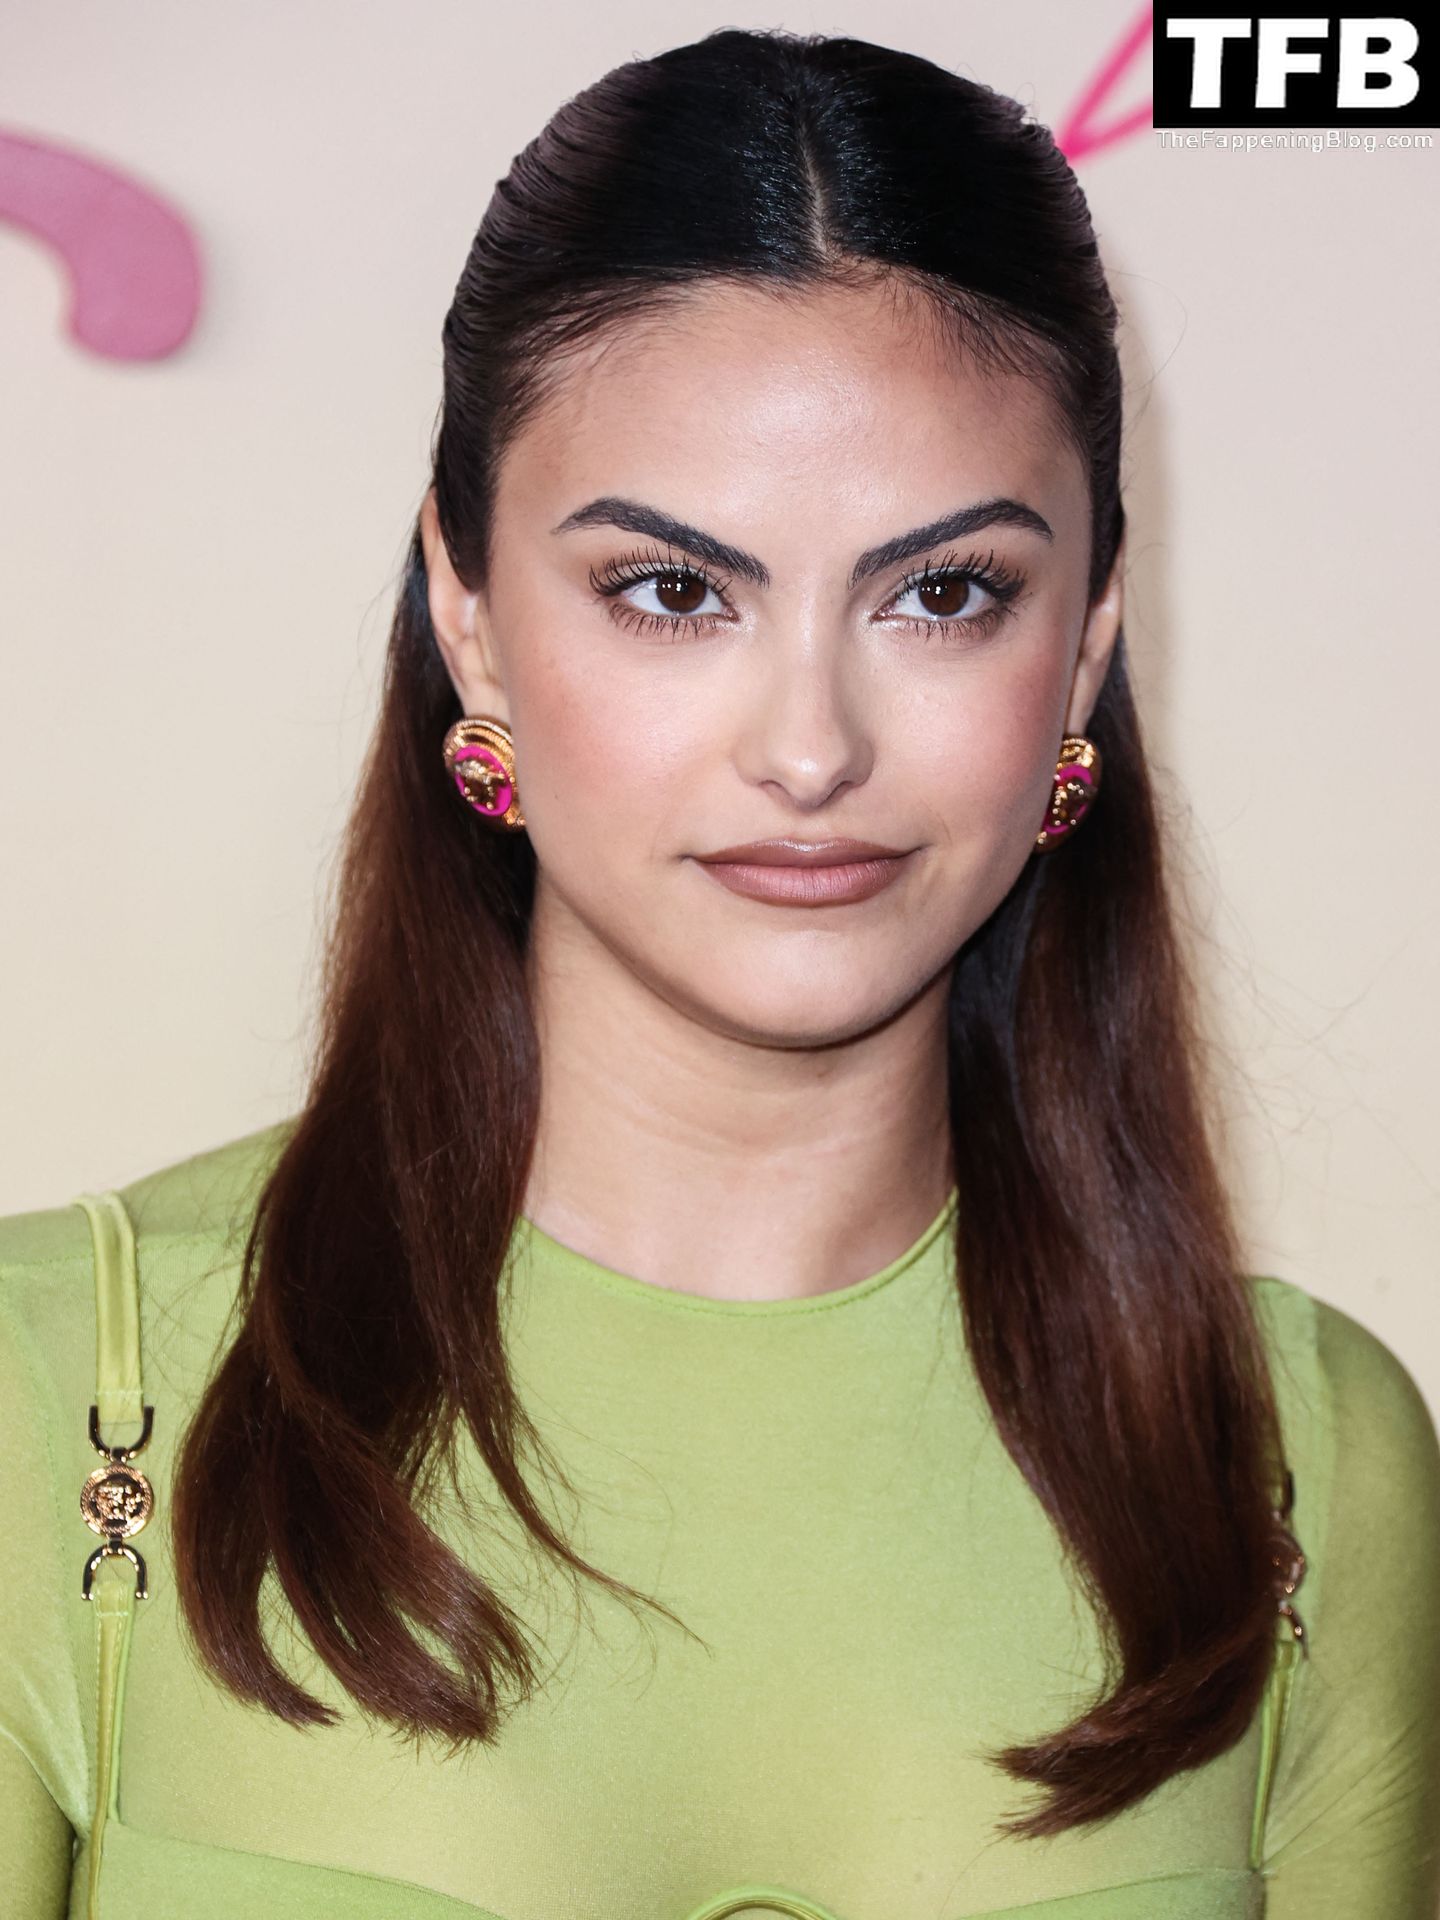 Camila-Mendes-Sexy-The-Fappening-Blog-83.jpg